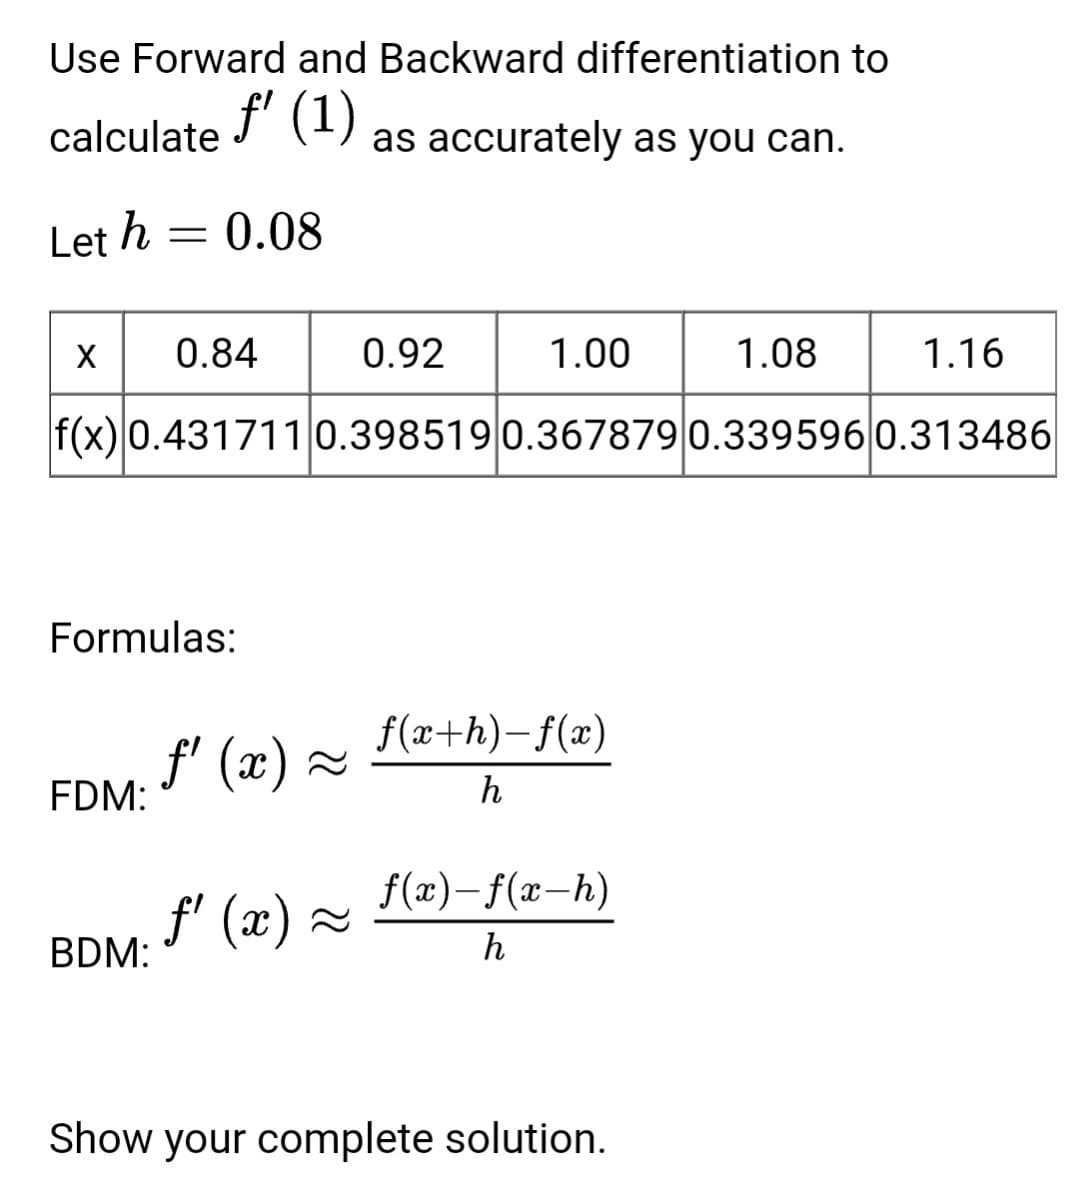 Use Forward and Backward differentiation to
f' (1)
calculate
as accurately as you can.
Let h = 0.08
X 0.84
0.92
1.00
1.08
1.16
f(x) 0.431711 0.398519 0.367879 0.339596|0.313486
Formulas:
f(x+h)-f(x)
f' (x) =
FDM:
h
f(x)- f(x-h)
f' (x) ~
BDM:
h
Show your complete solution.
